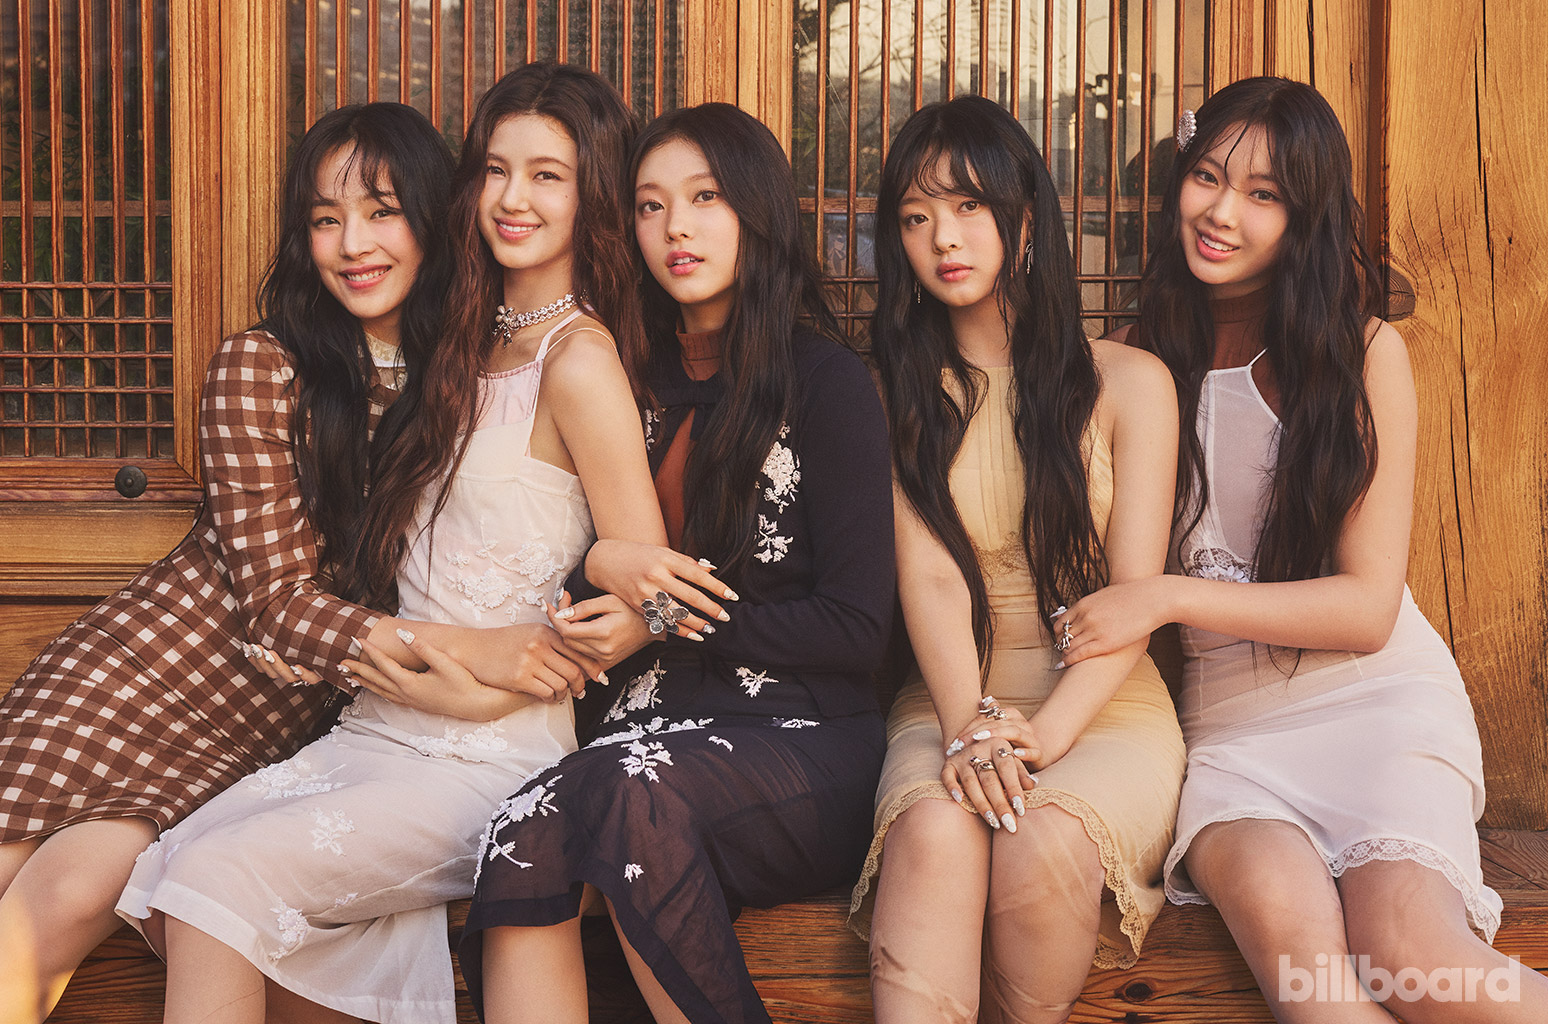 newjeans explain their ‘surreal' success smashing expectations for women in k-pop